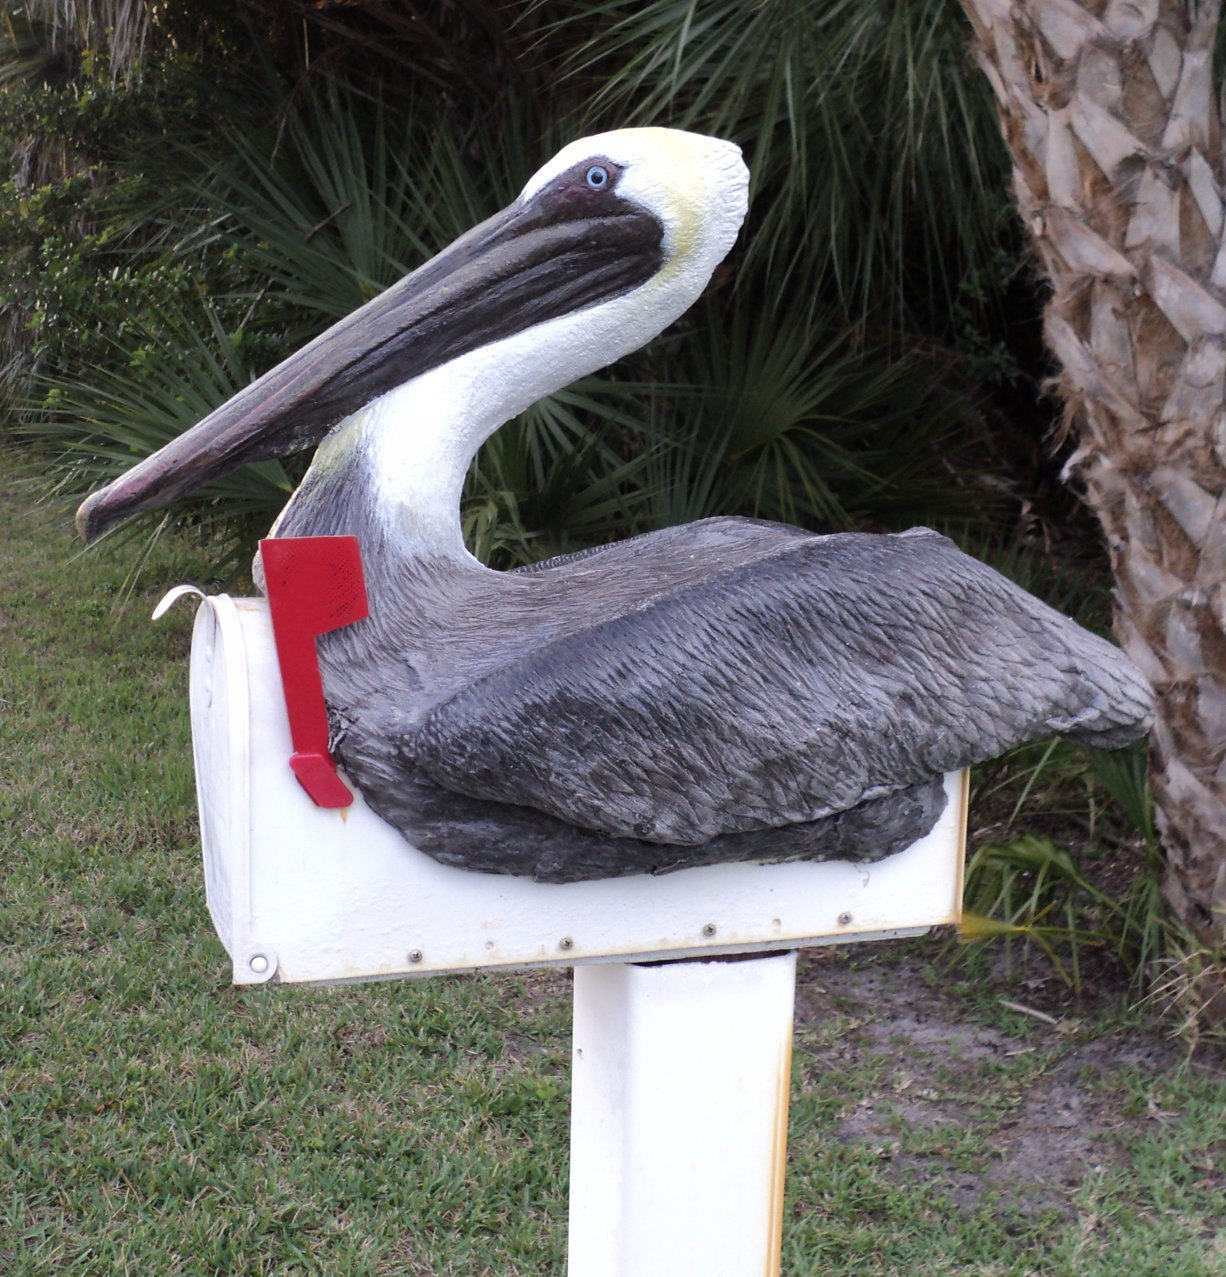 Lifesize Brown Pelican On Mailbox - $312.00